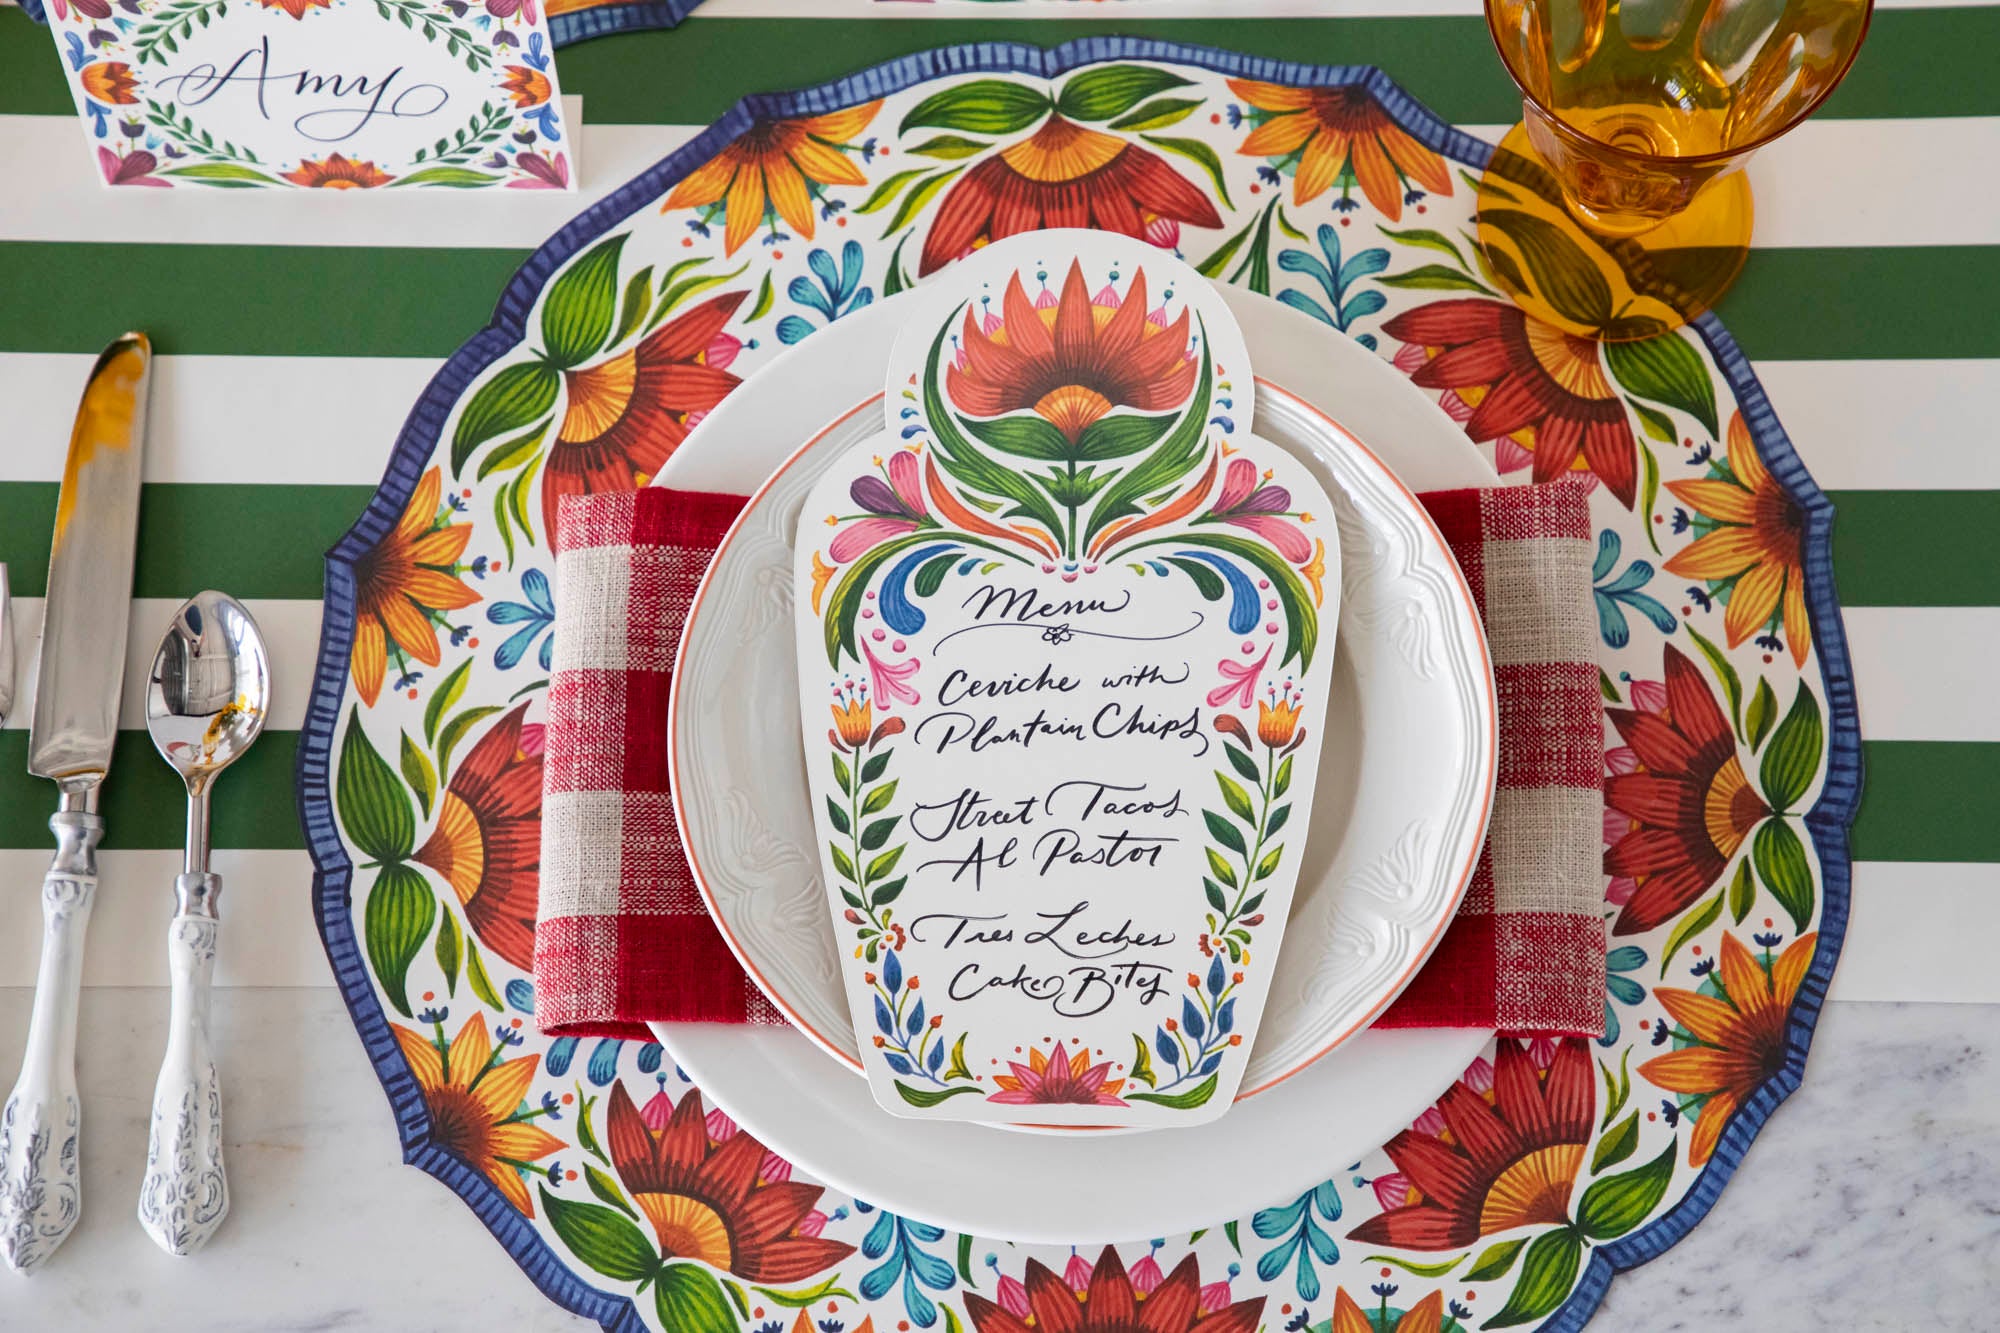 A table setting with colorful plates and napkins adorned with Hester &amp; Cook&